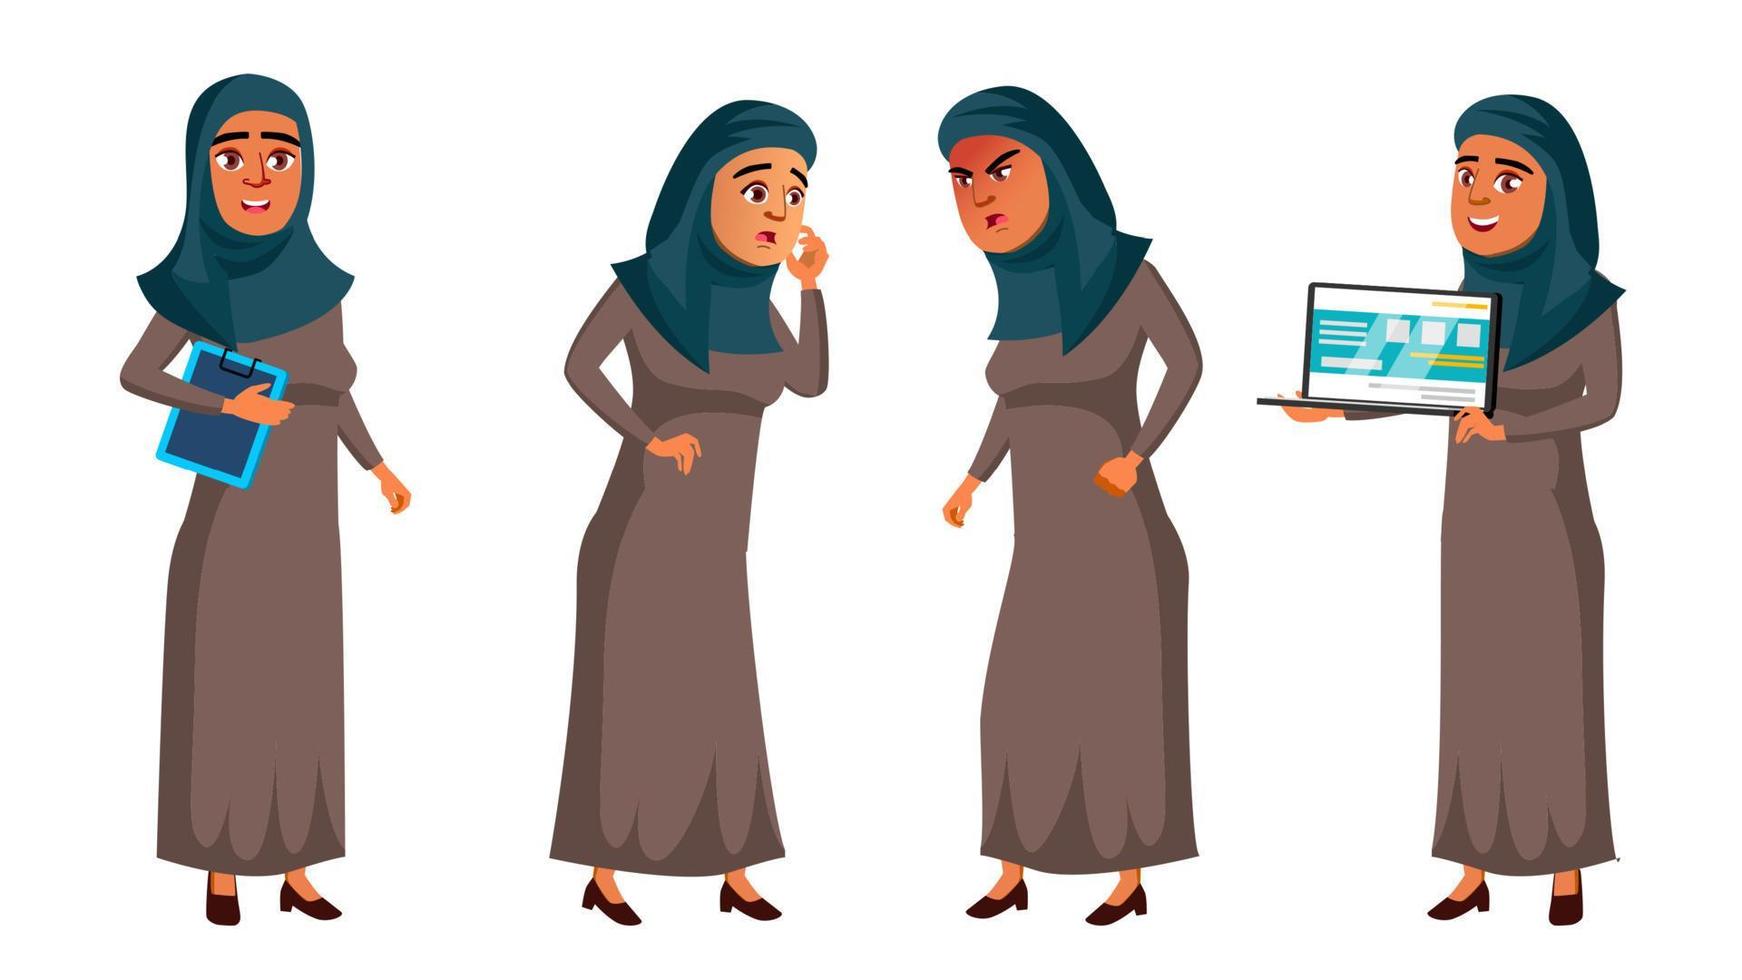 Arab, Muslim Teen Girl Set Vector. Face. Office Manager Person. For Web, Brochure, Poster Design. Isolated Cartoon Illustration vector